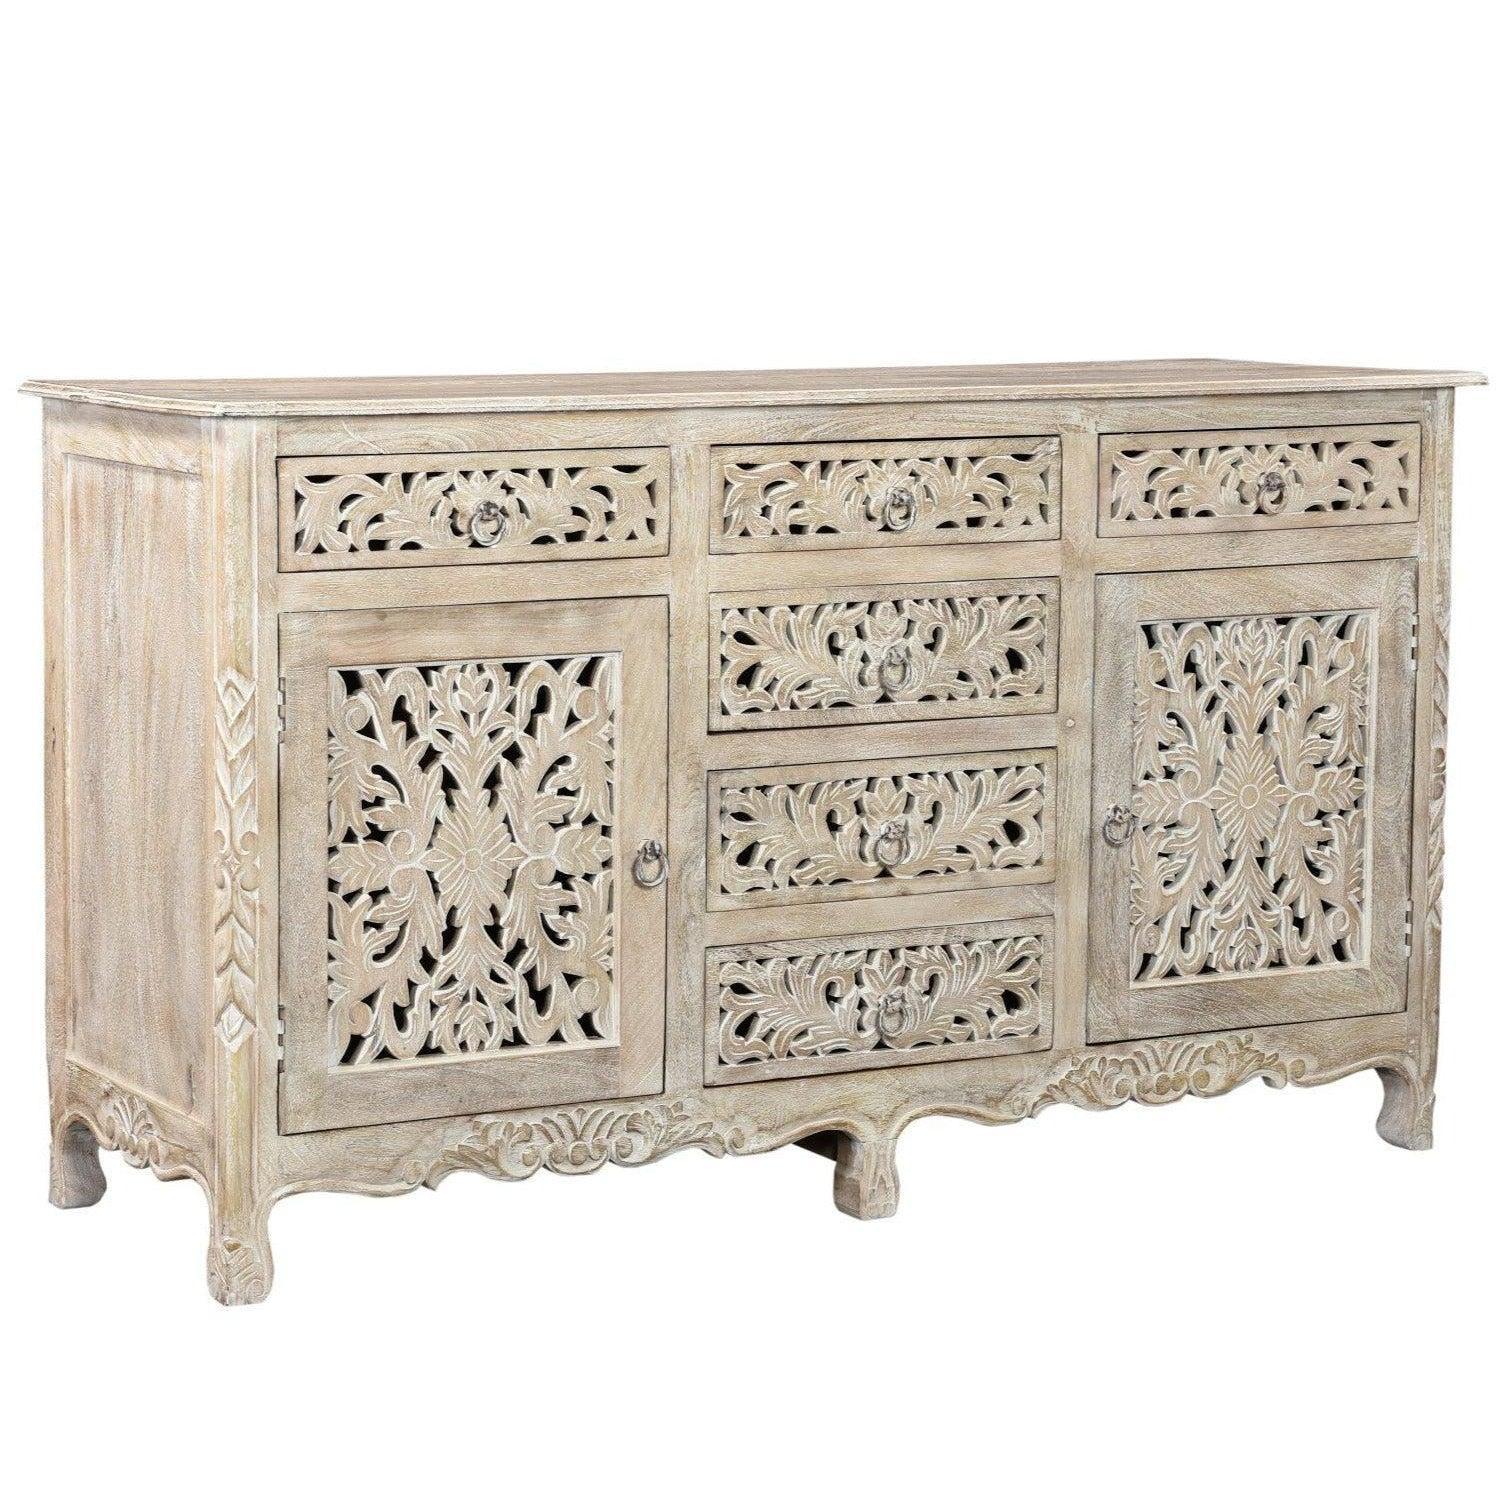 Lawrence 66 inches Floral Carved Sideboard in Distressed White - Sideboards and Things Brand_LOOMLAN Home, Color_White, Features_Handmade, Features_Handmade/Handcarved, Features_Repurposed Materials, Features_With Drawers, Finish_Distressed, Finish_Whitewashed, Hinges, Materials_Reclaimed Wood, Materials_Wood, Shelf Material_Wood, Table Top_Wood, Width_60-70, Wood Species_Mango